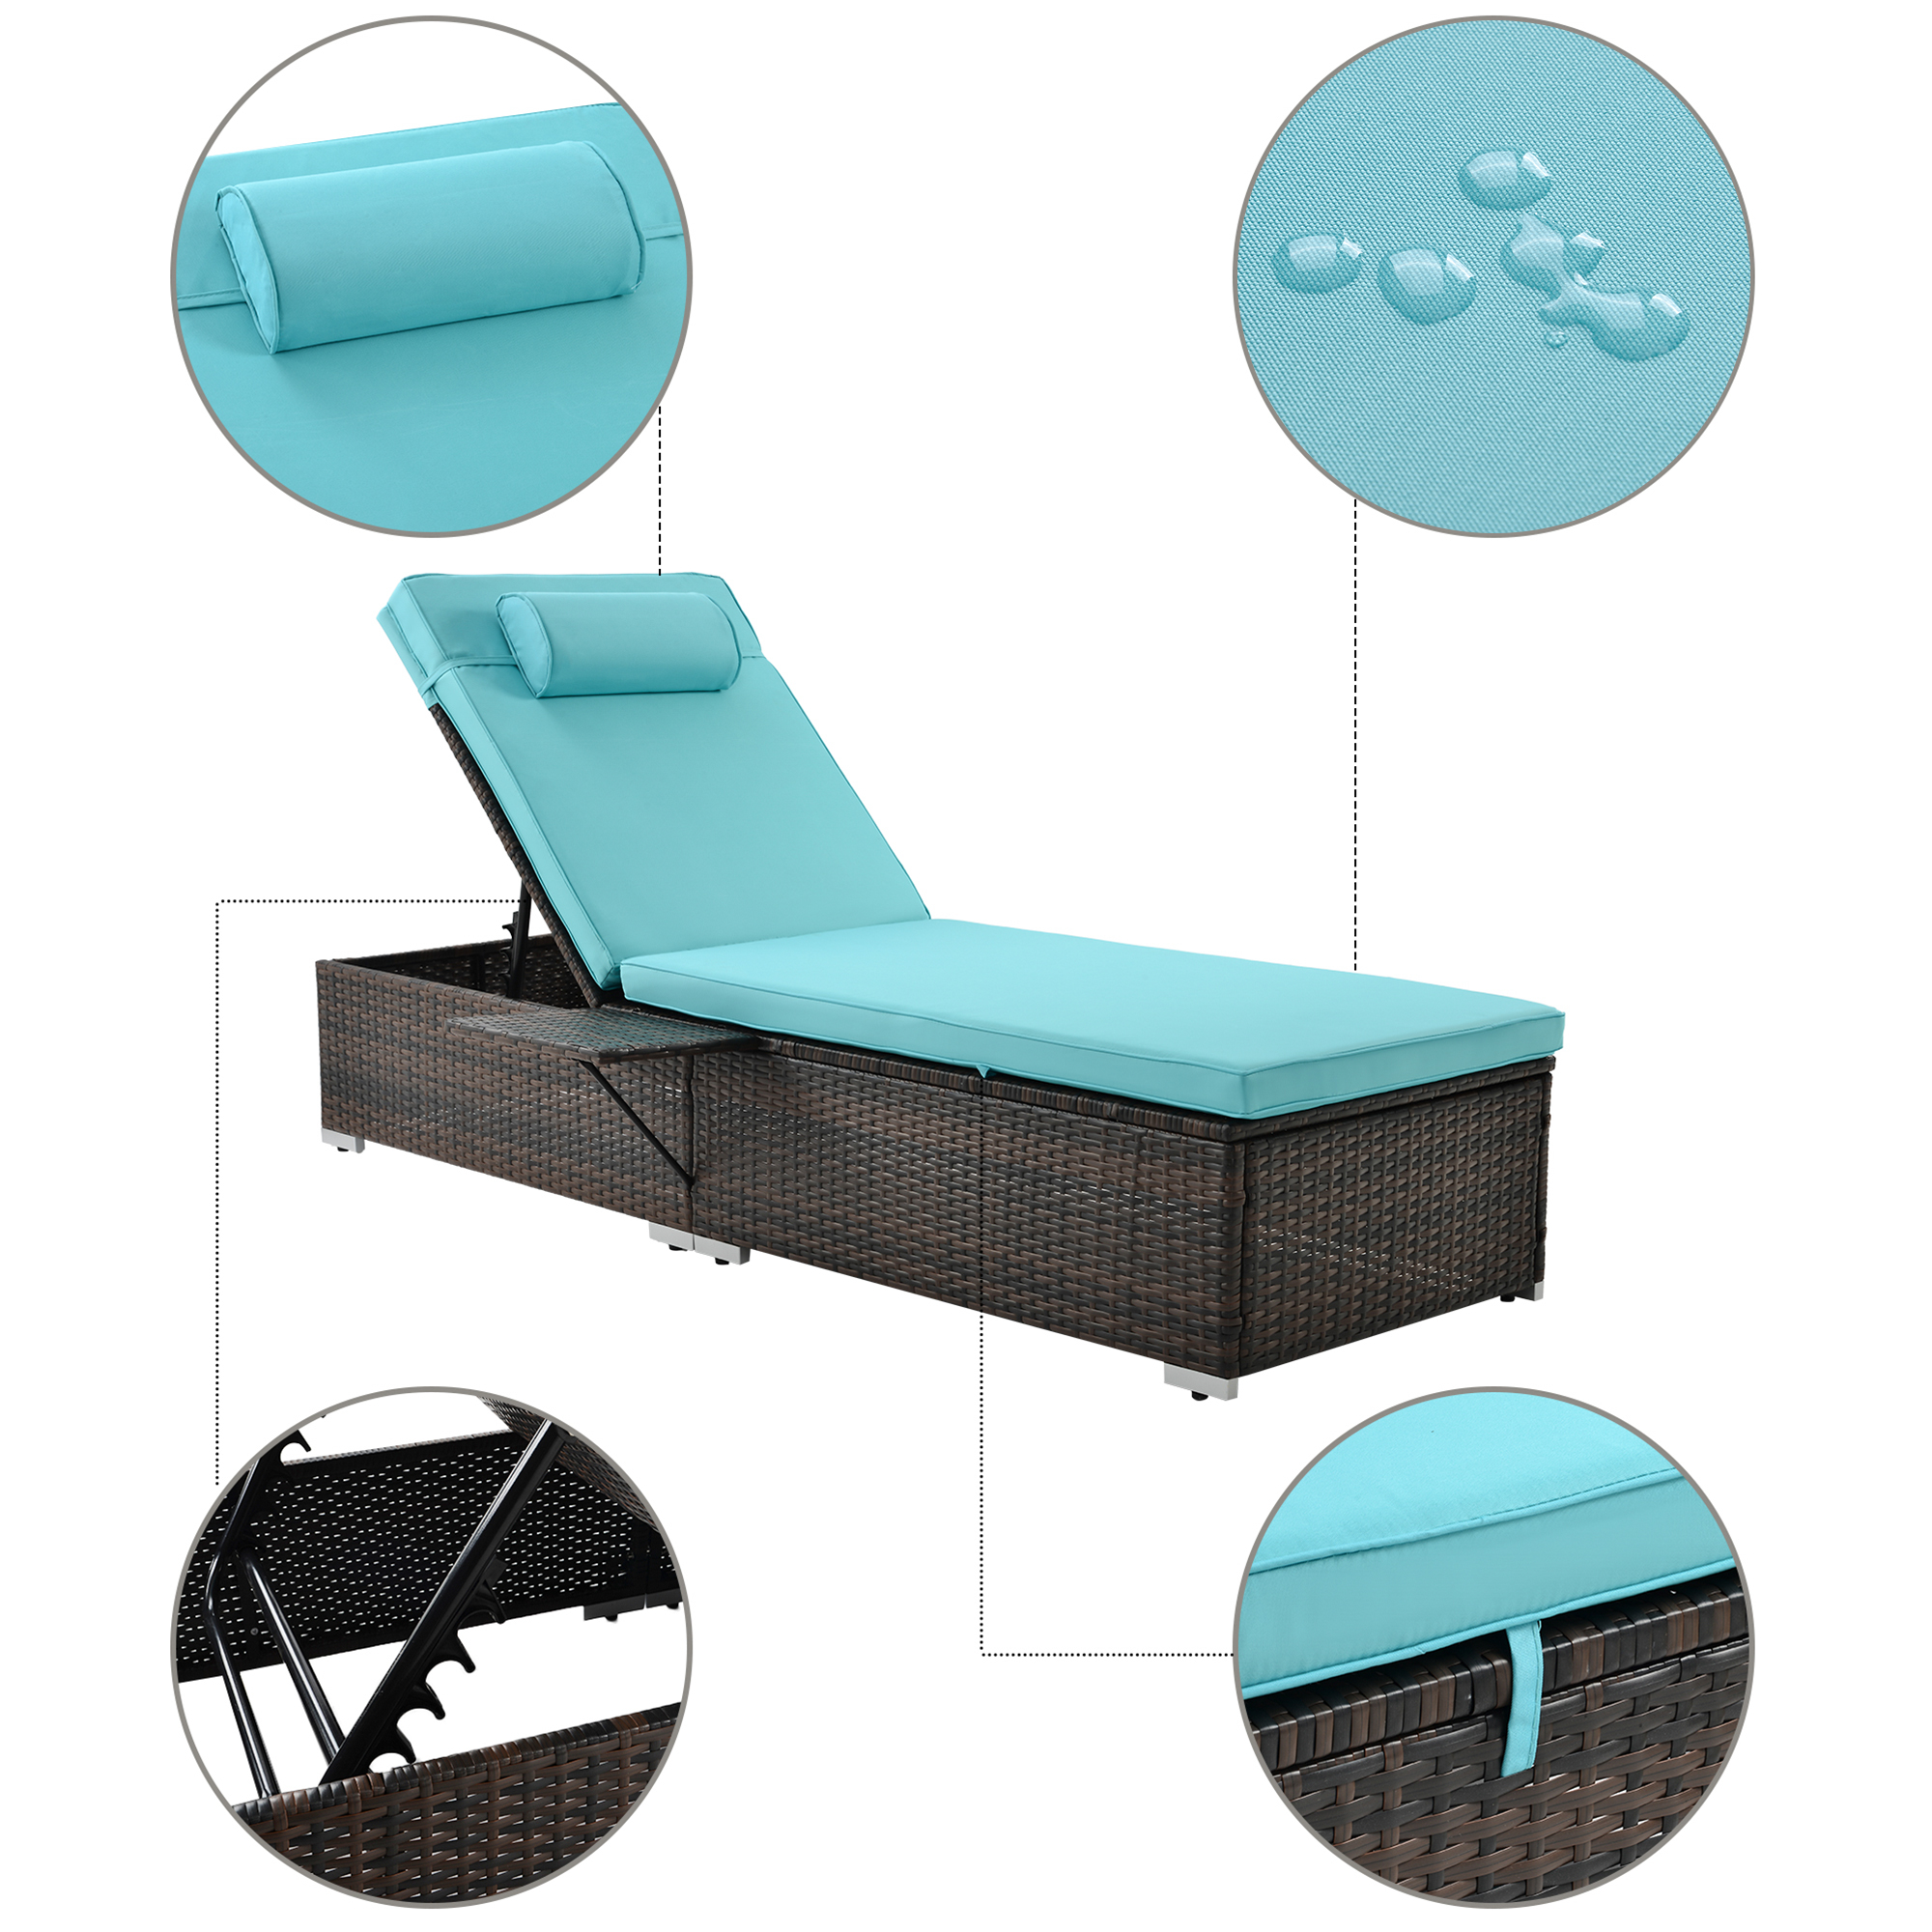 2 Pieces Wicker Patio Lounge Chair Set, Adjustable PE Rattan Chaise Lounge with Side Table and Cushion, Outdoor Lounger Recliner for Garden, Balcony, Poolside, Patio, Deck, Backyard - image 5 of 10